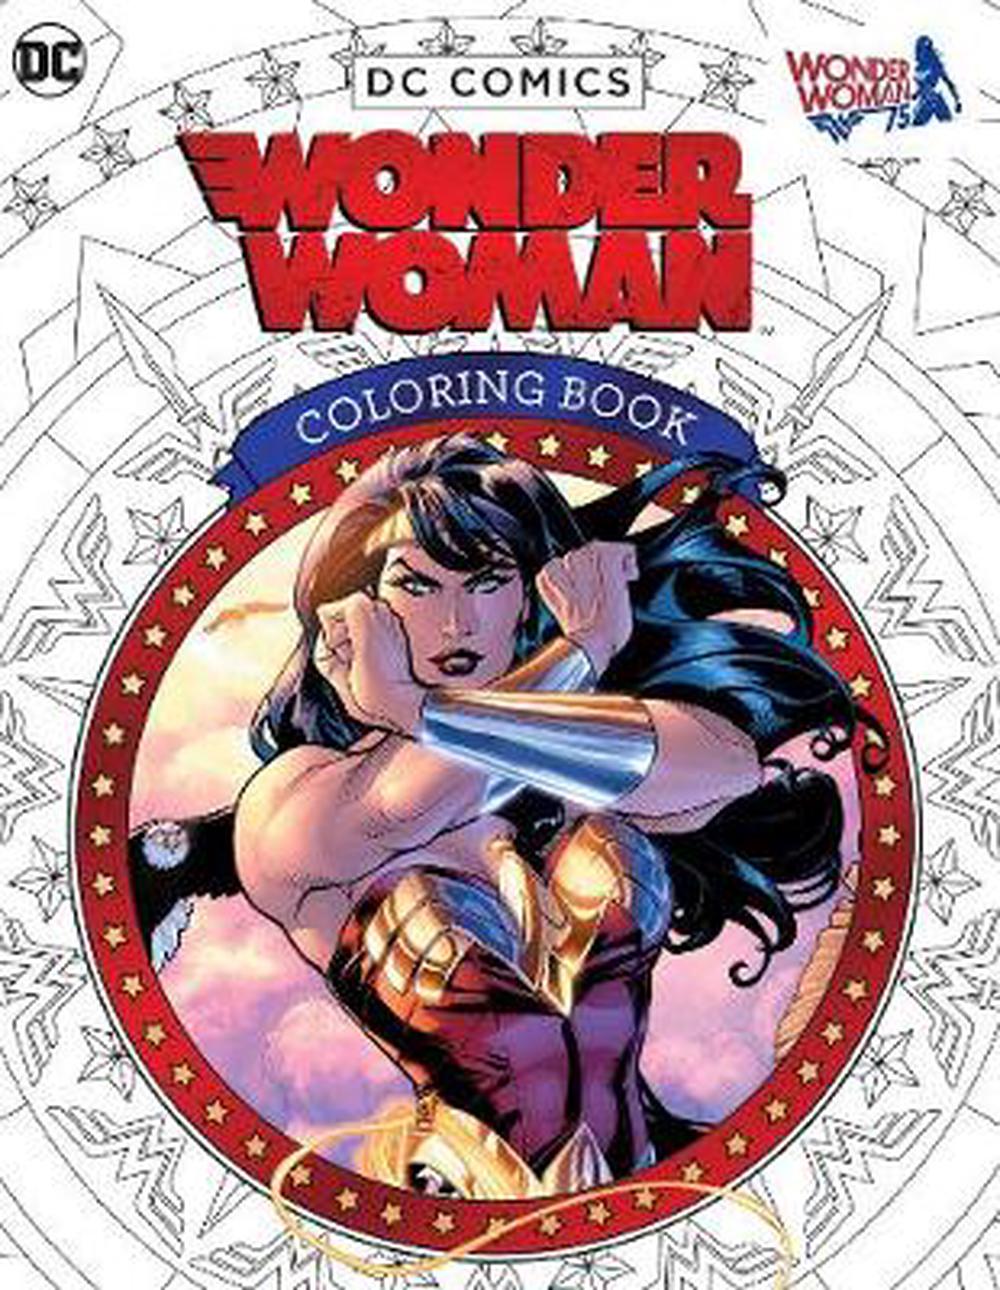 Download Dc Comics Wonder Woman Coloring Book By Insight Editions Paperback 9781608878925 Buy Online At Moby The Great